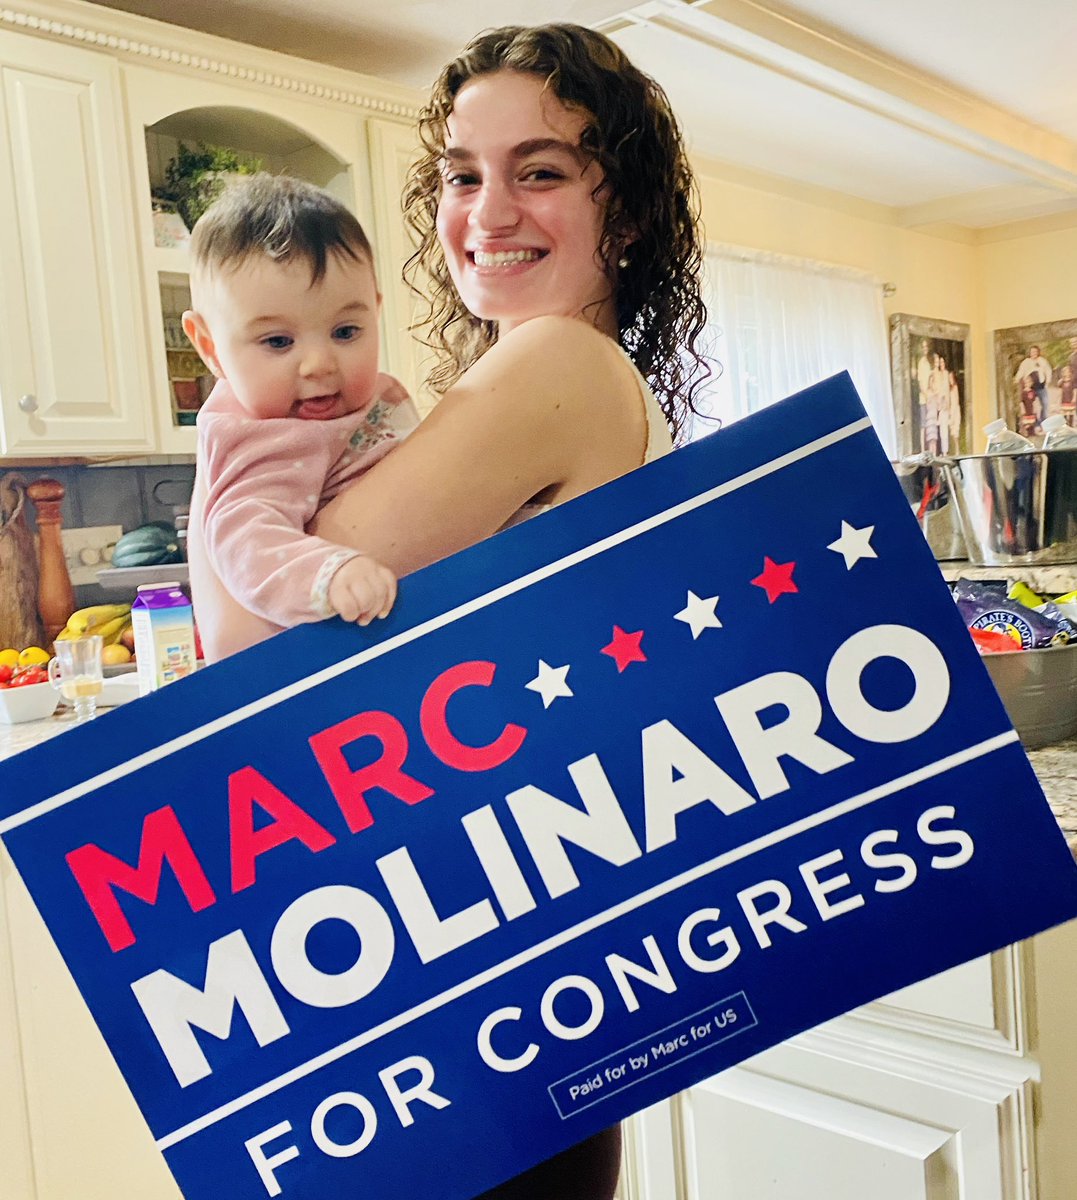 #TeamMolinaro is on ground and in the field meeting voters in Vestal, Bing, JC and Union! We have one job: Earn the votes. We can save our state and get America back on track! I ask for your vote. #NY19 #MarcForUS